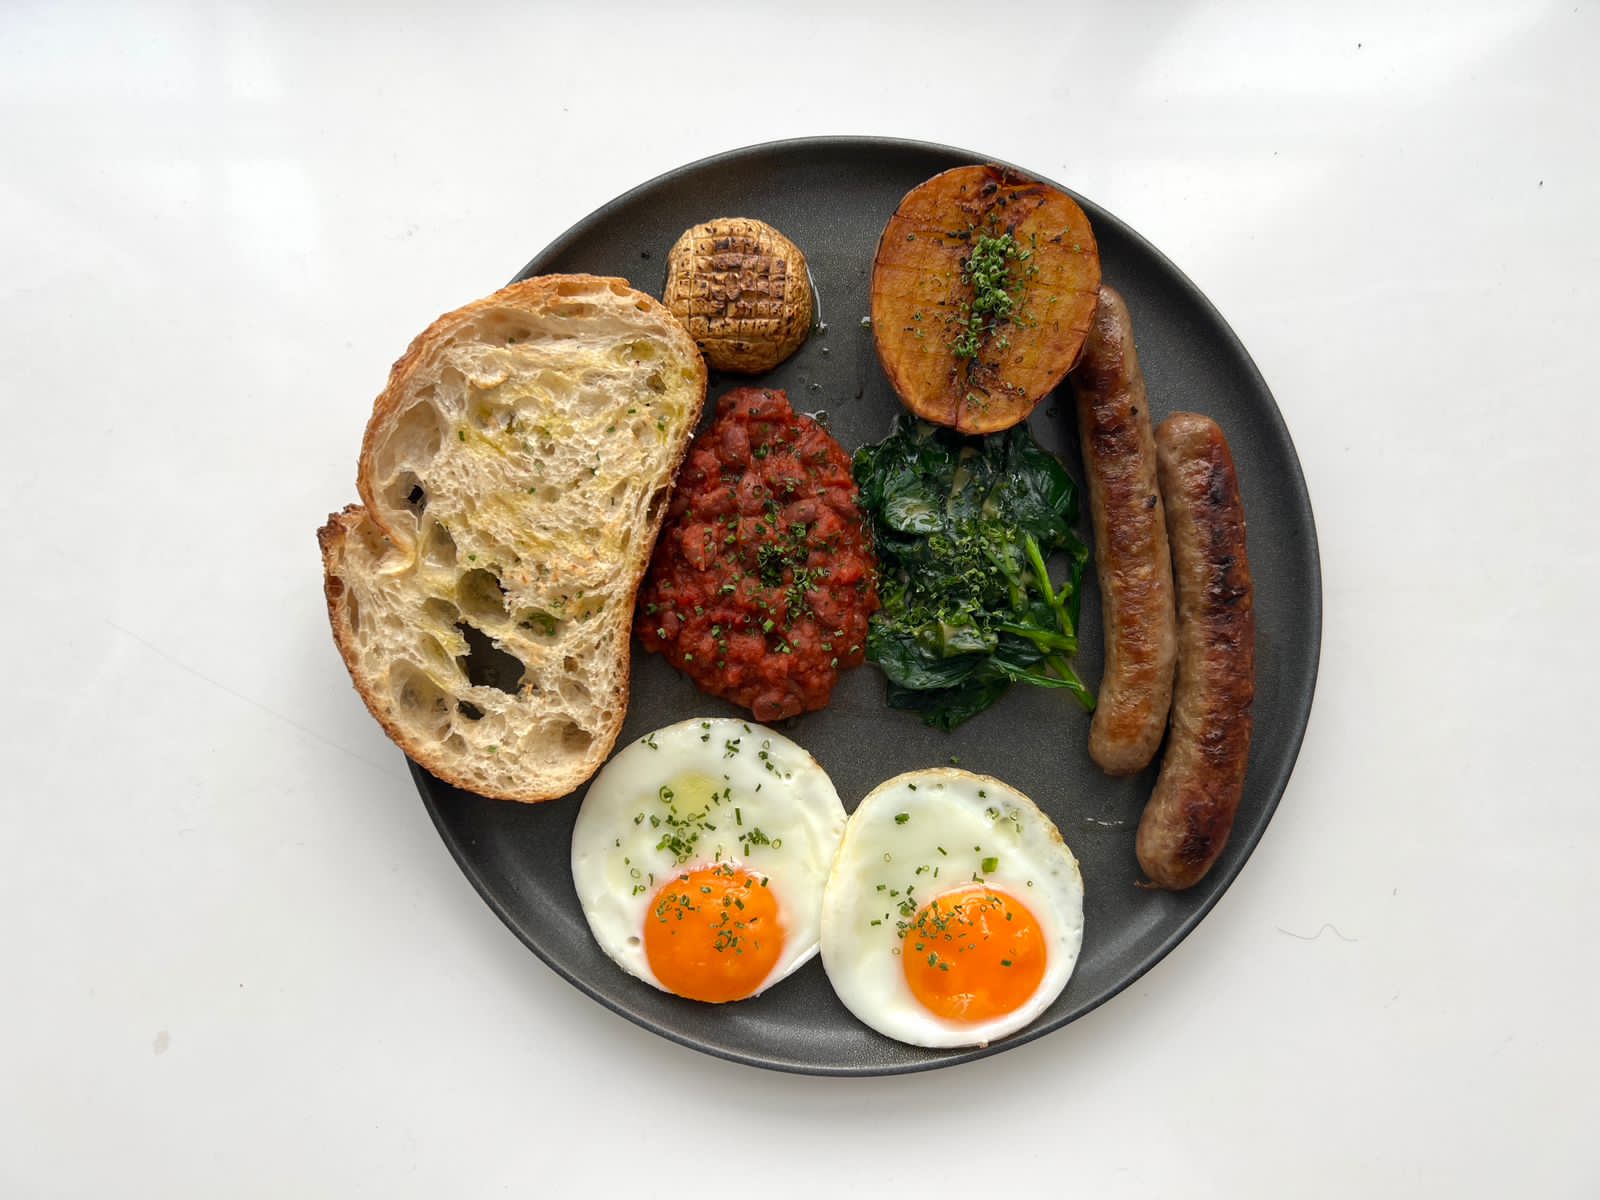 London breakfast <span color-type="color" style="color: #ea7f54;">ALL DAY</span>